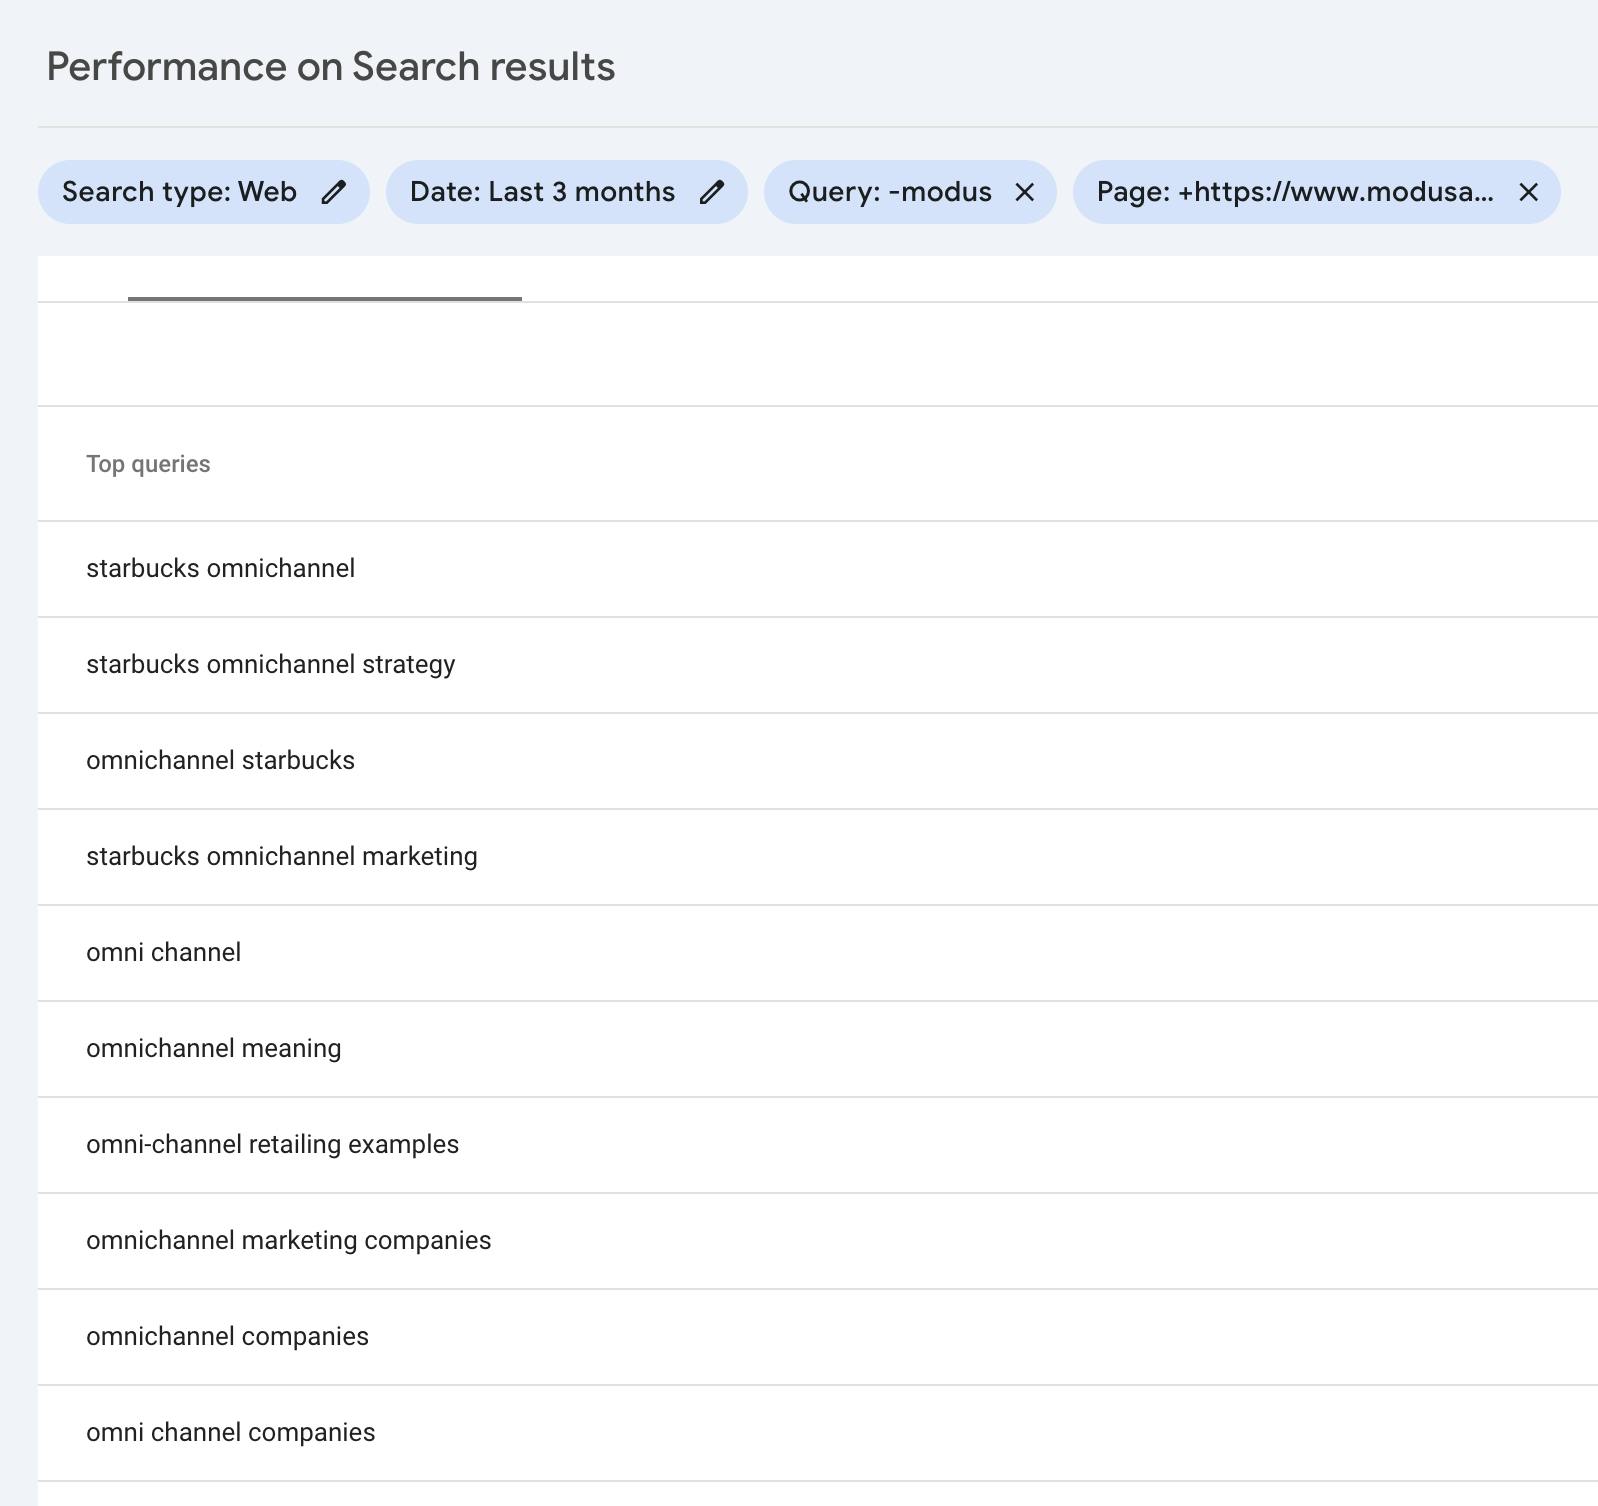 Sample results from Google Search Console for queries for a page about omnichannel marketing